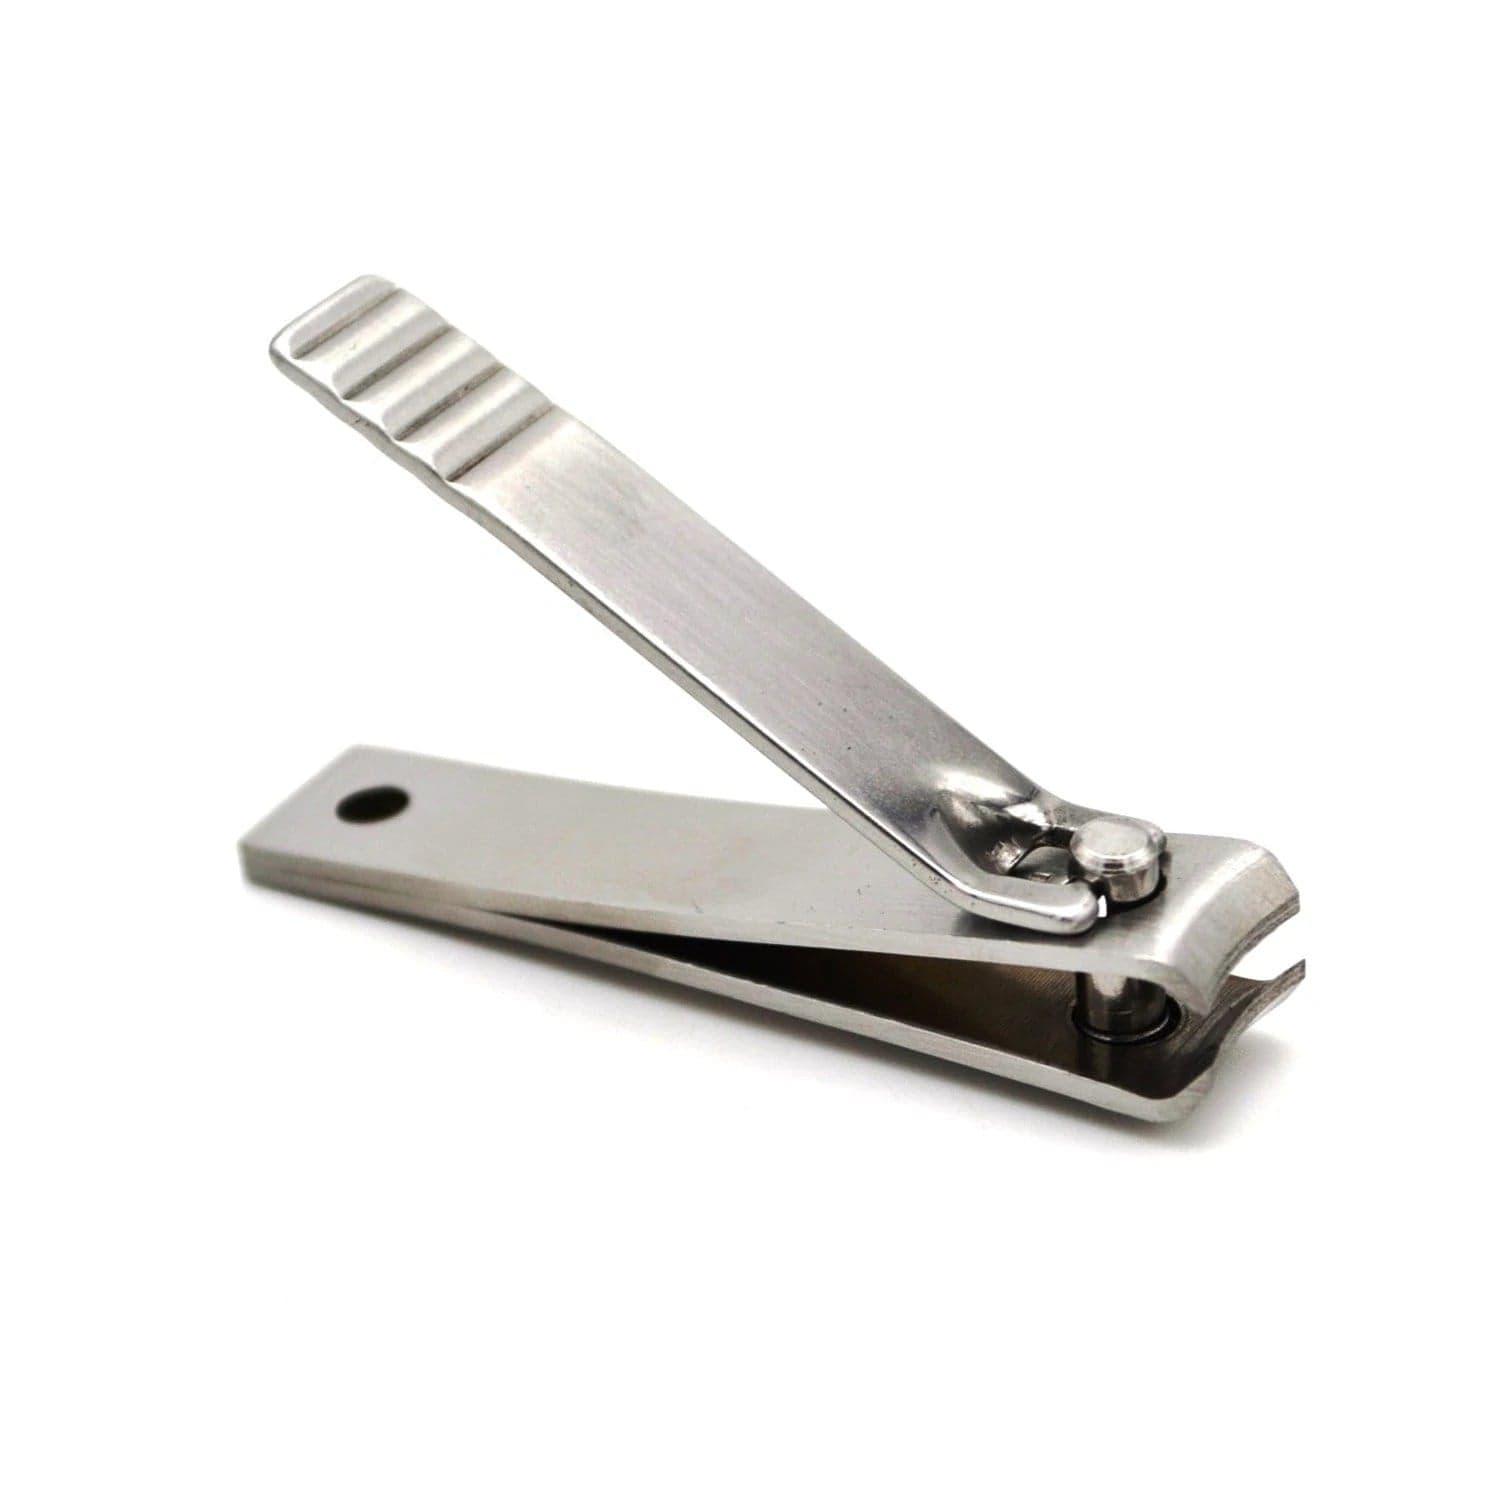 Black Nail Cutter Small 1pc - S144